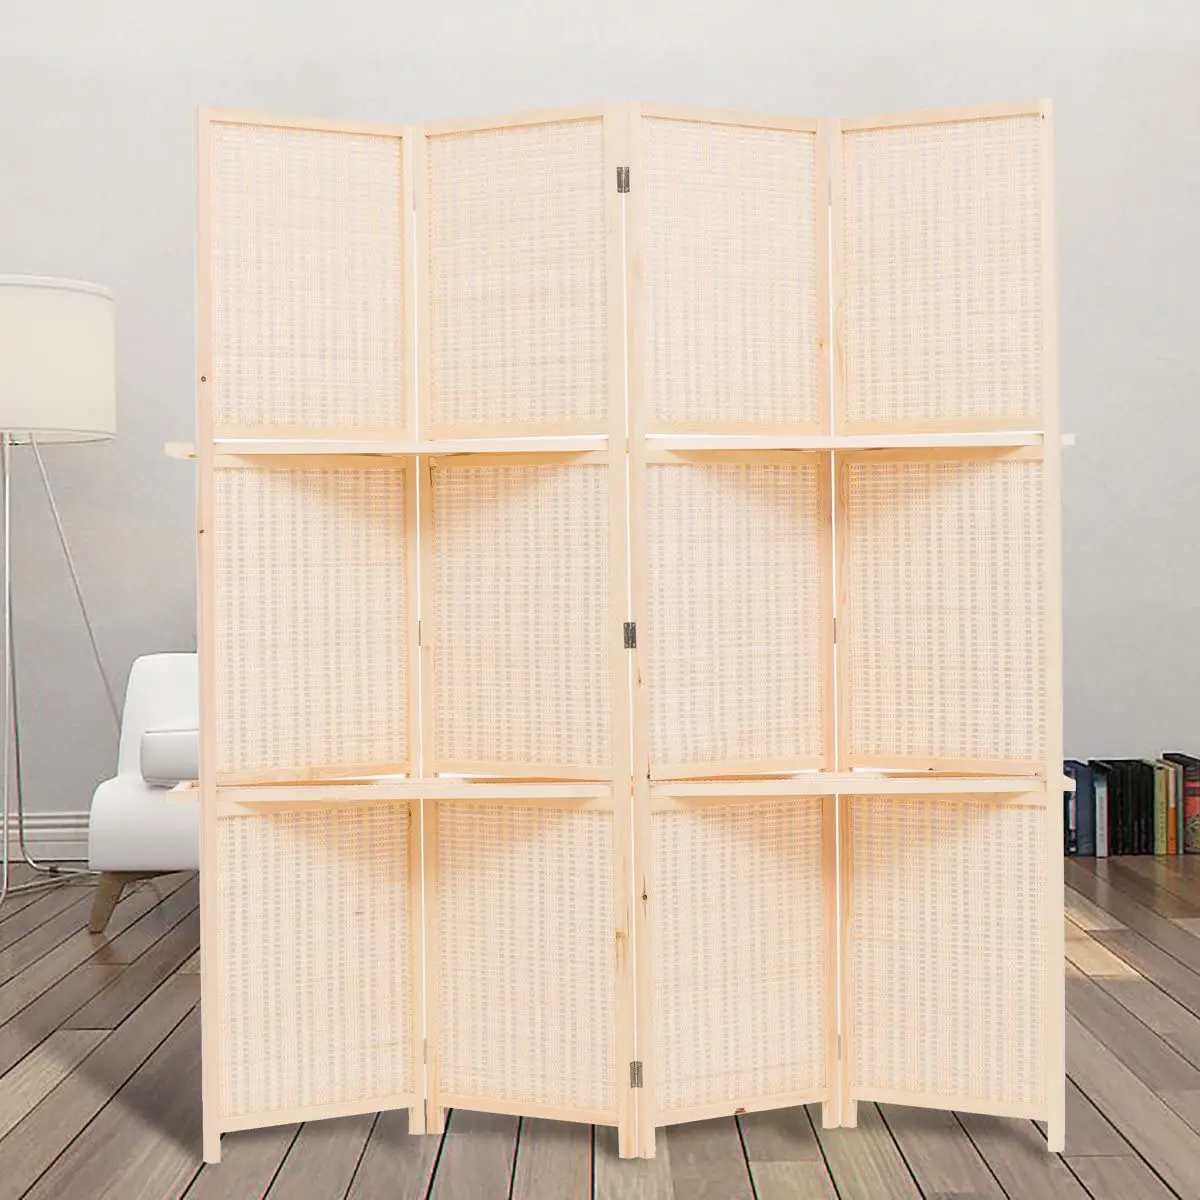 

Wooden bamboo decorative living room dining room divider shelf privacy moveable interior free standing partition screen